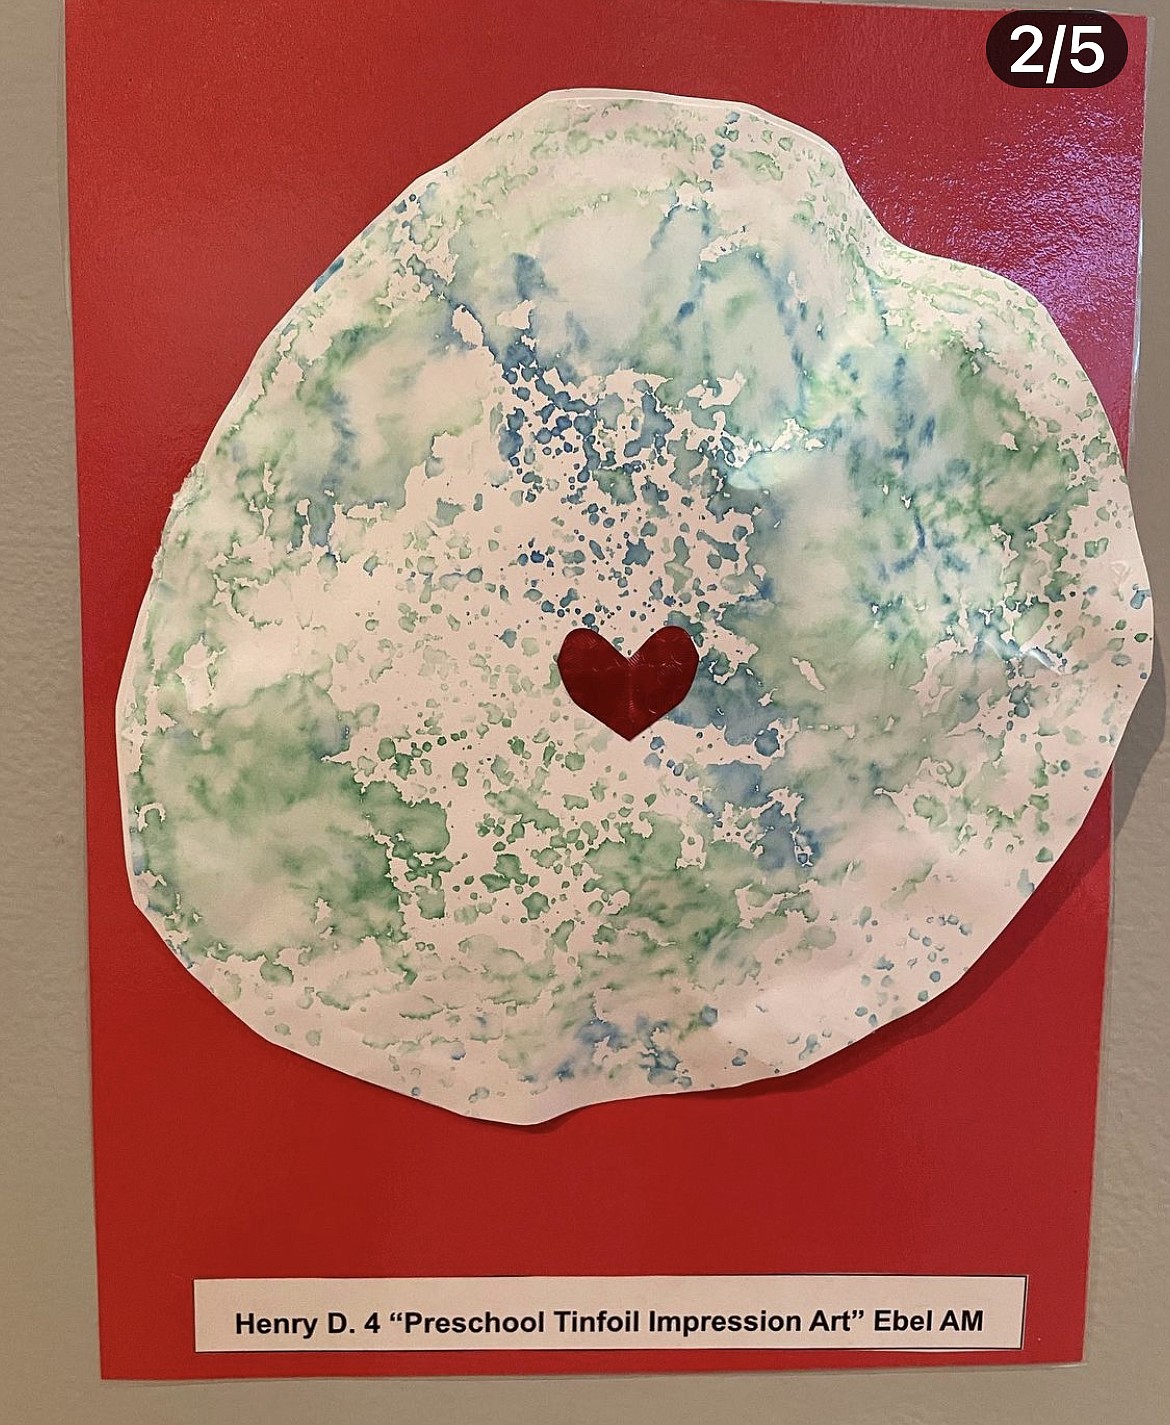 Above is a close-up of Henry Duvall’s (pictured on A1) art piece that was featured in the show. The heart in the center of the piece reflects the show’s theme of kindness.